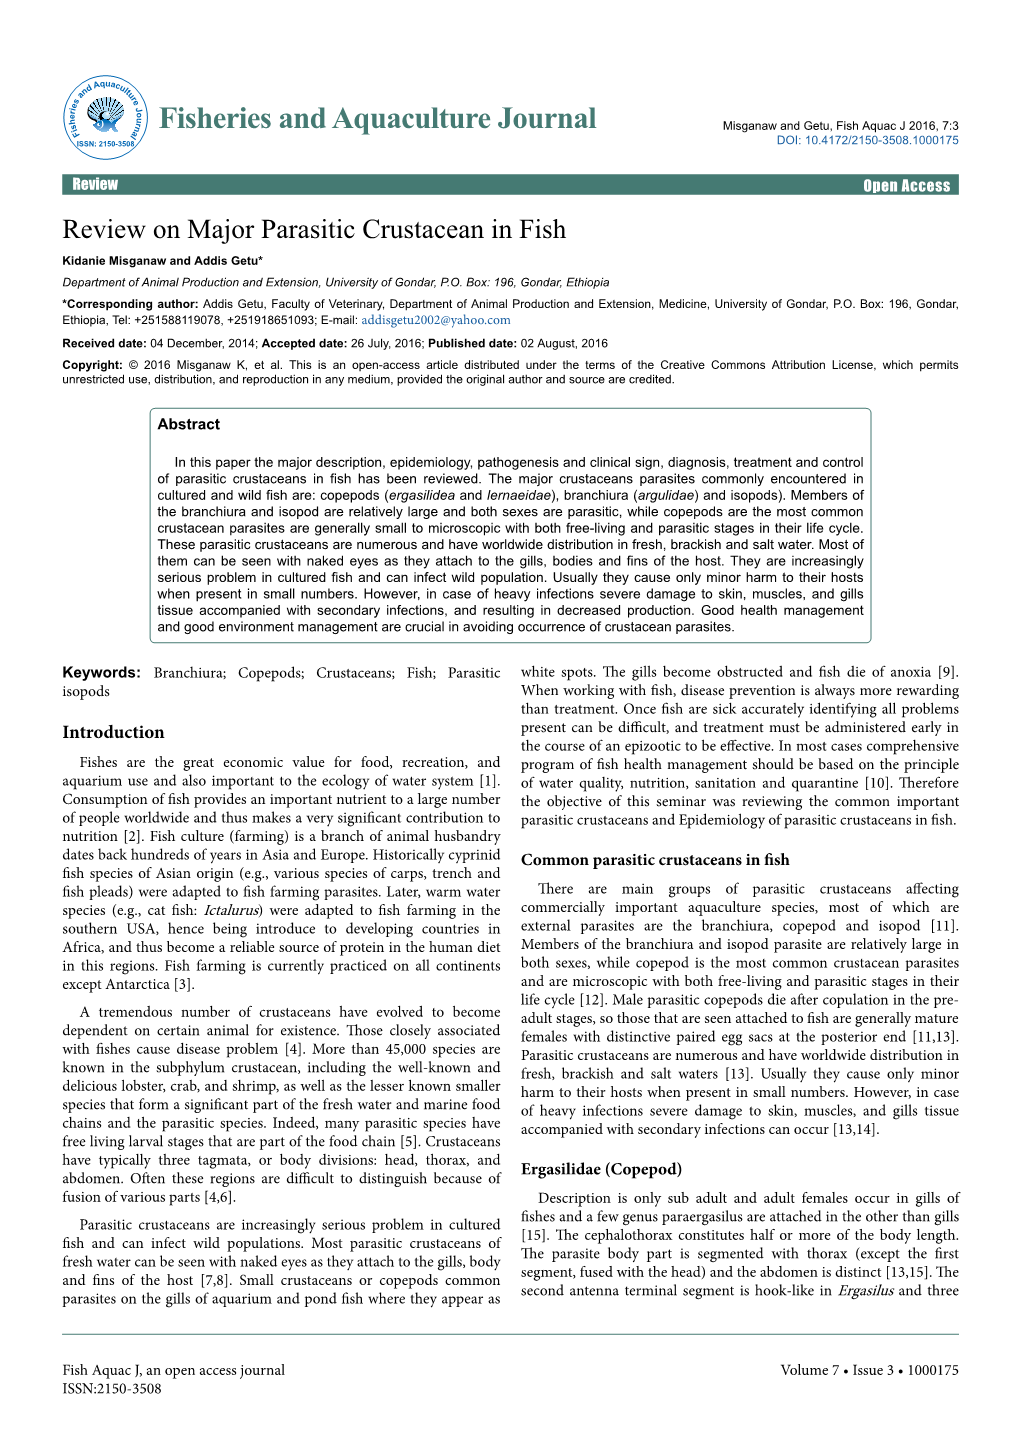 Review on Major Parasitic Crustacean in Fish Kidanie Misganaw and Addis Getu* Department of Animal Production and Extension, University of Gondar, P.O